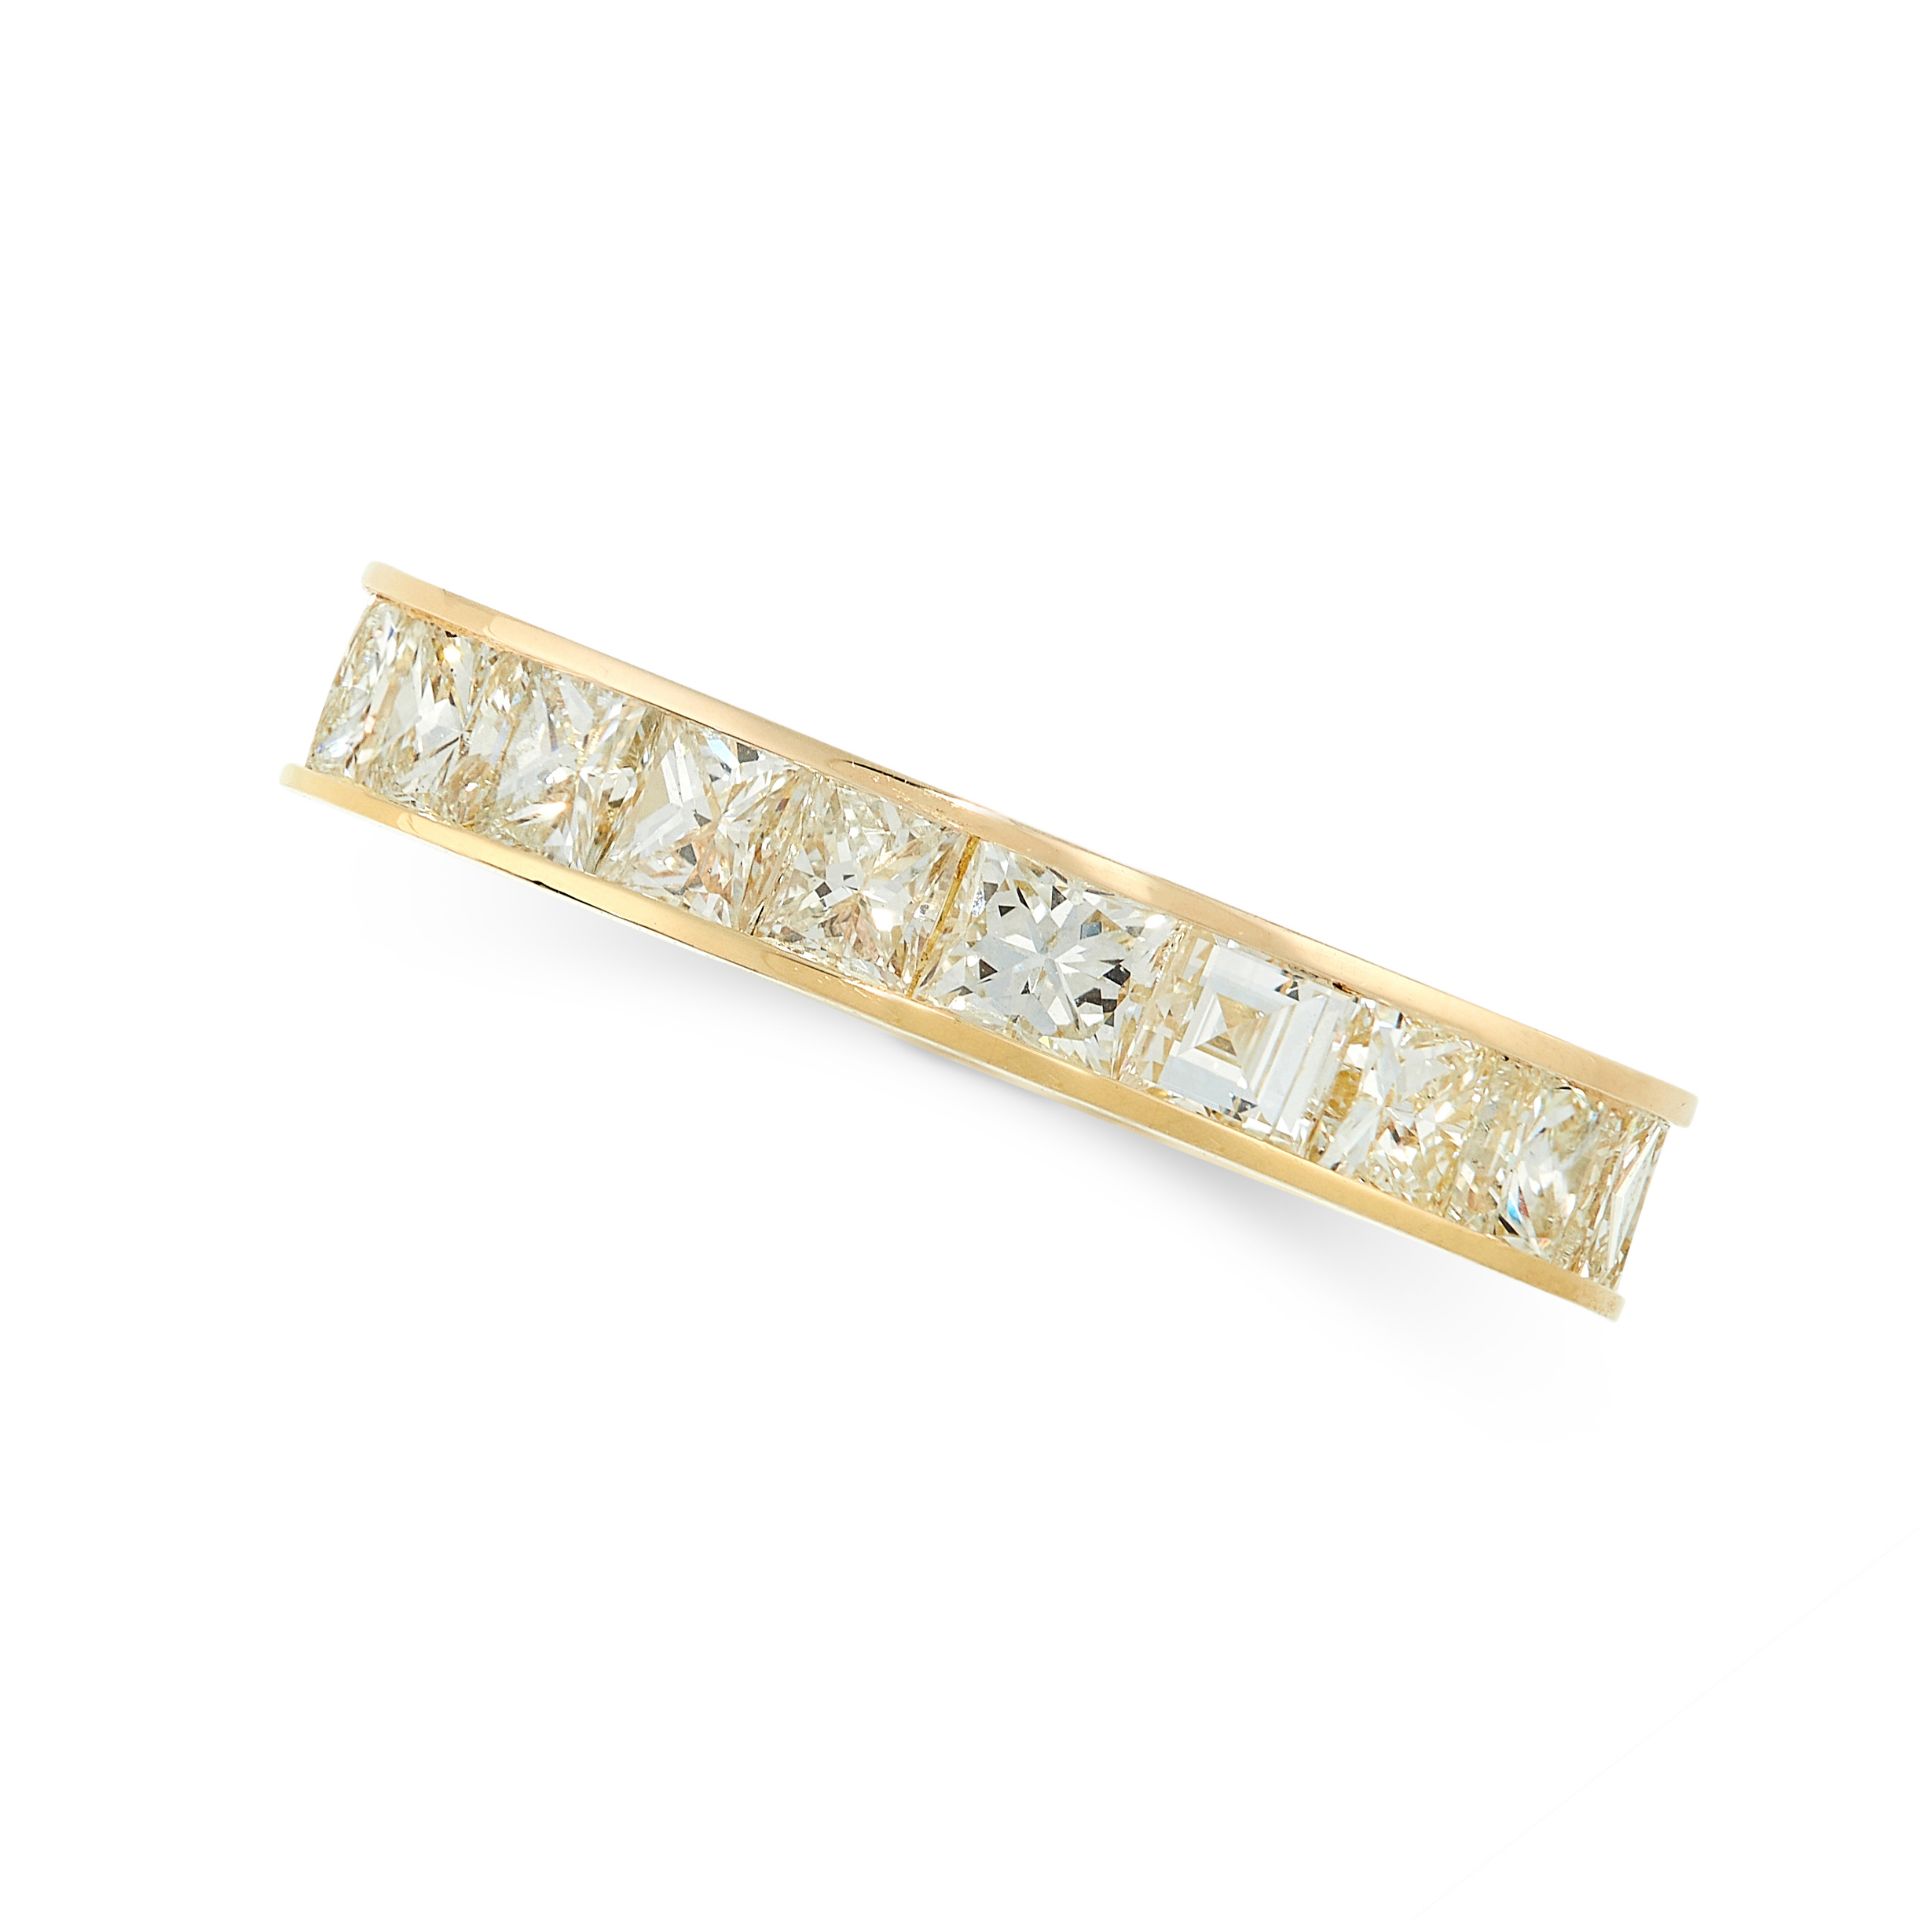 DIAMOND ETERNITY BAND RING in 18ct yellow gold, the band set all around with a single row of